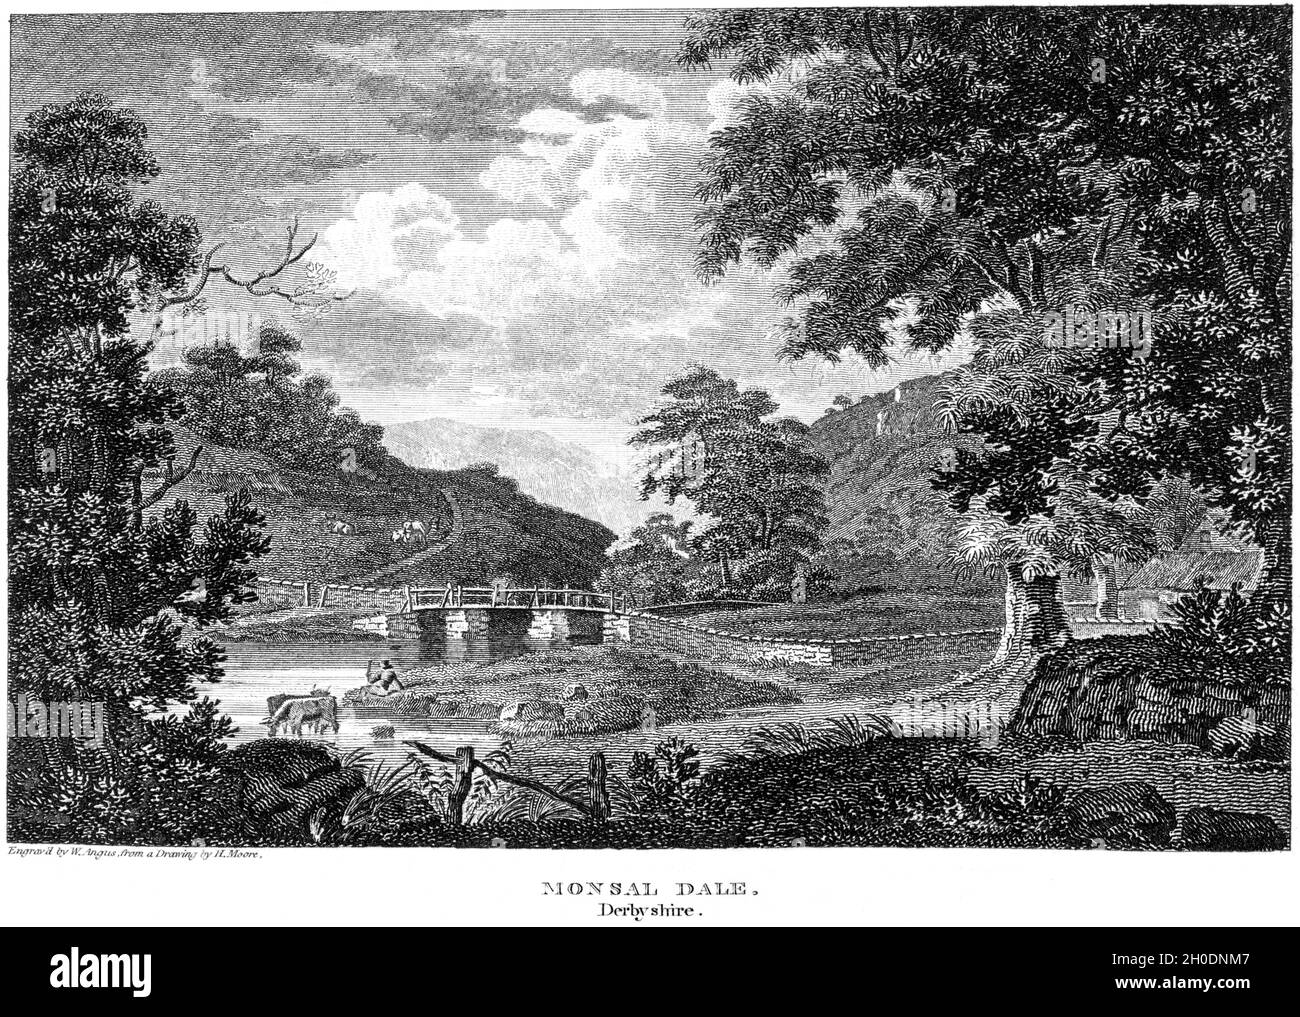 An engraving of Monsal Dale, Derbyshire UK scanned at high resolution from a book printed in 1812. Believed copyright free. Stock Photo